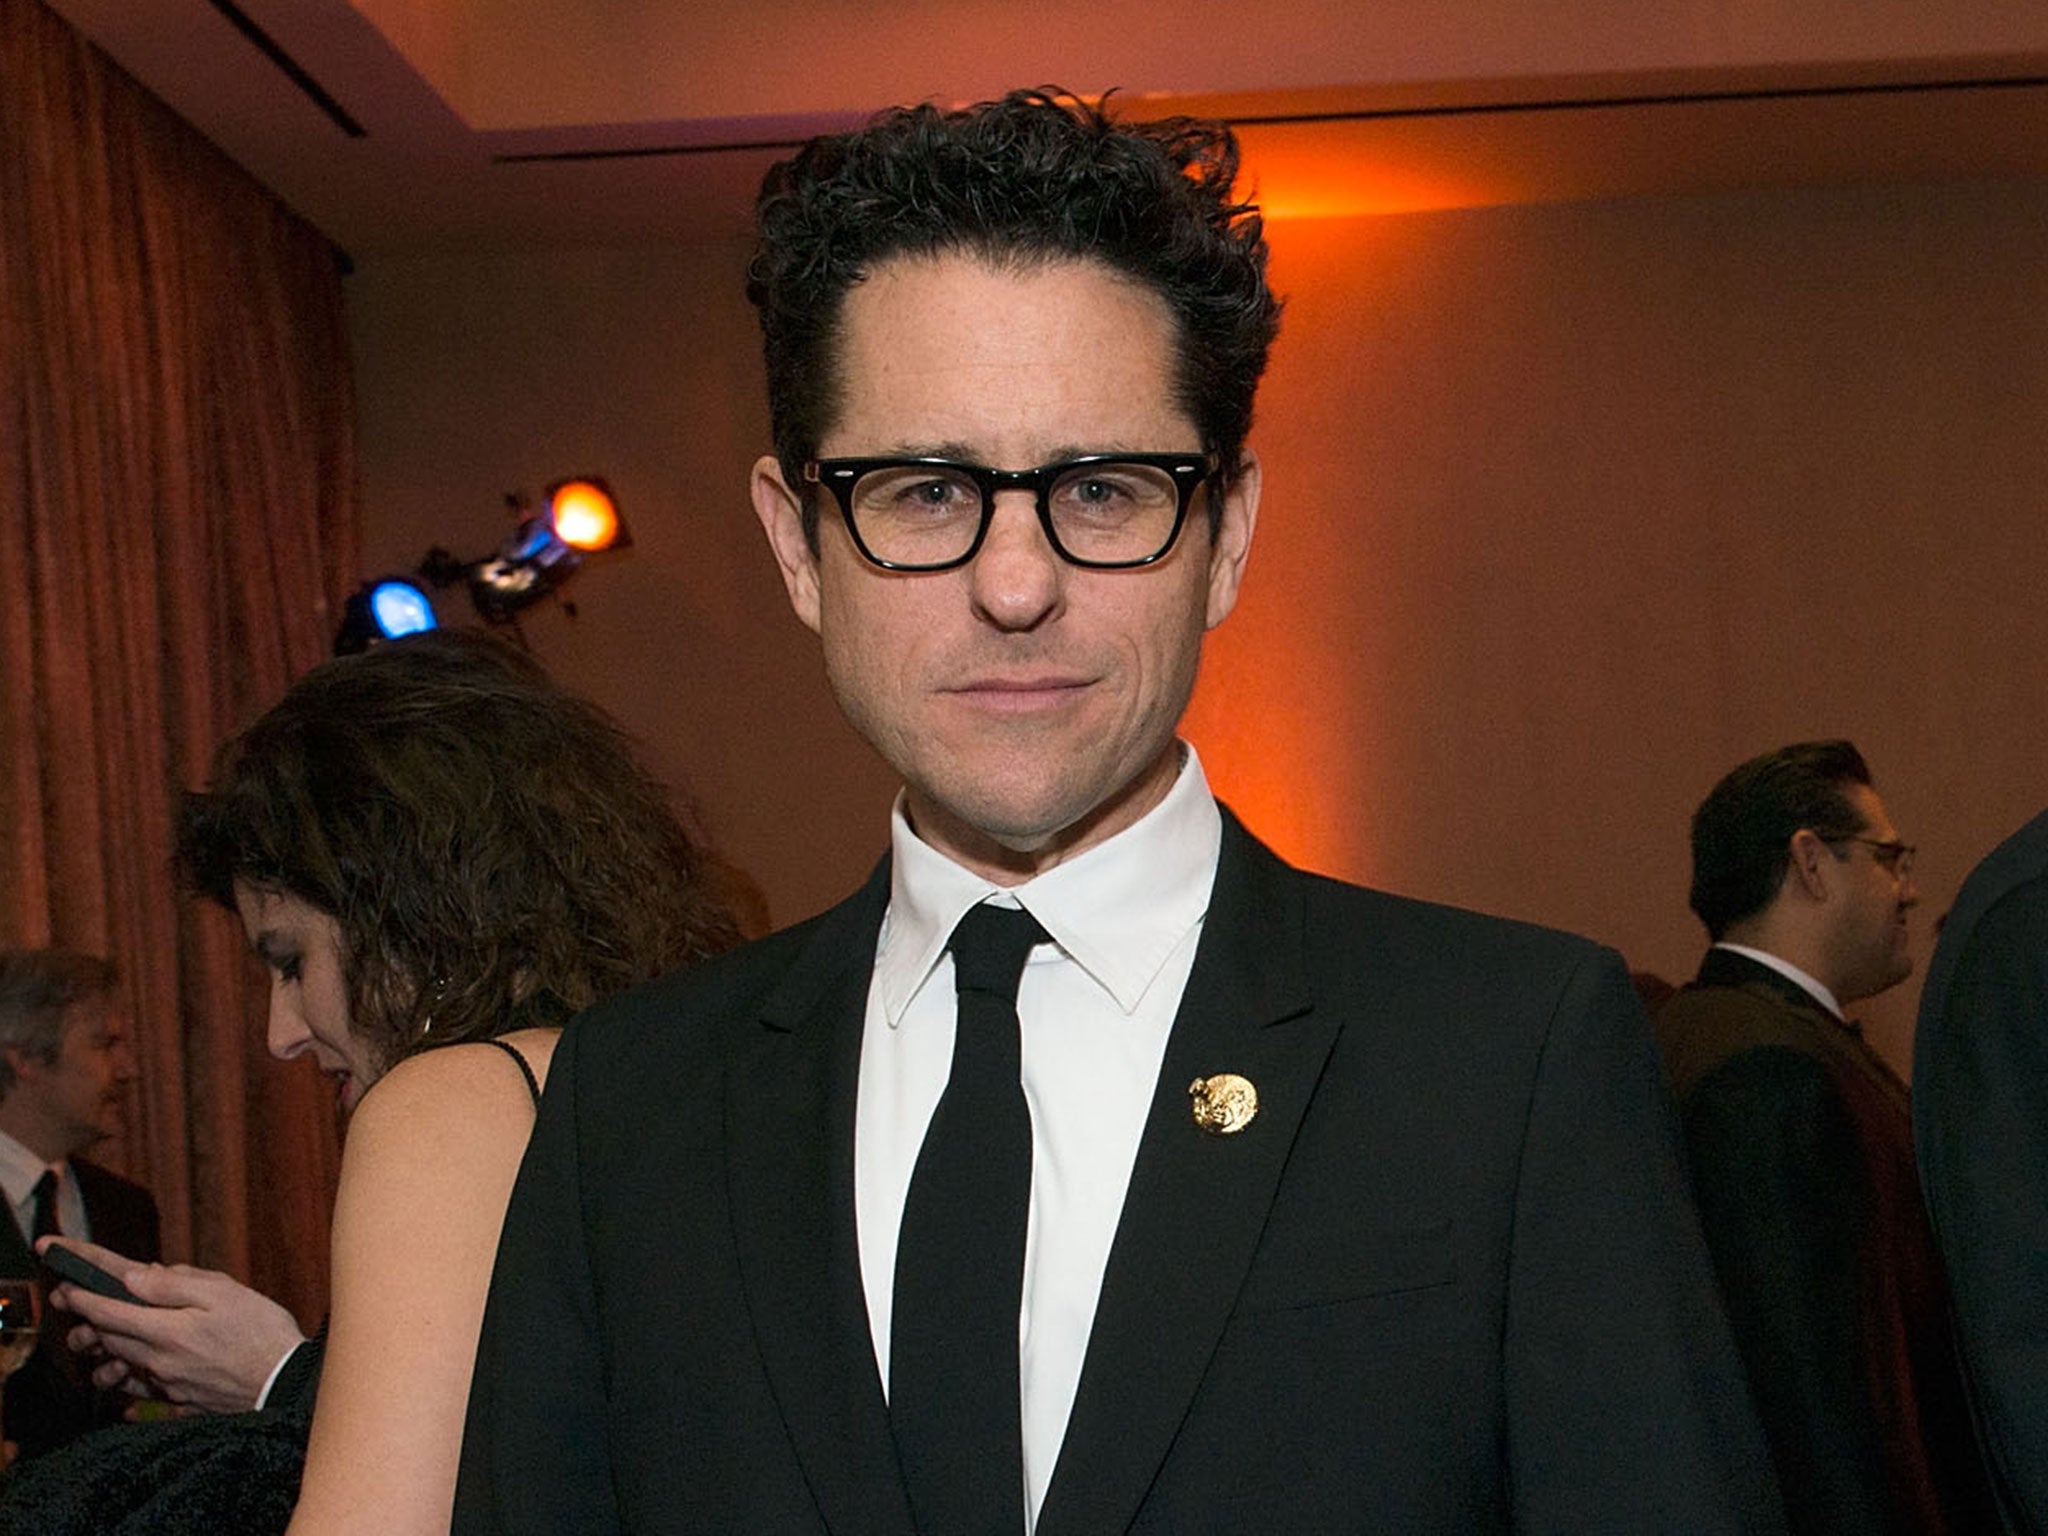 Star Wars: The Force Awakens director JJ Abrams can't wait for fans to see his movie